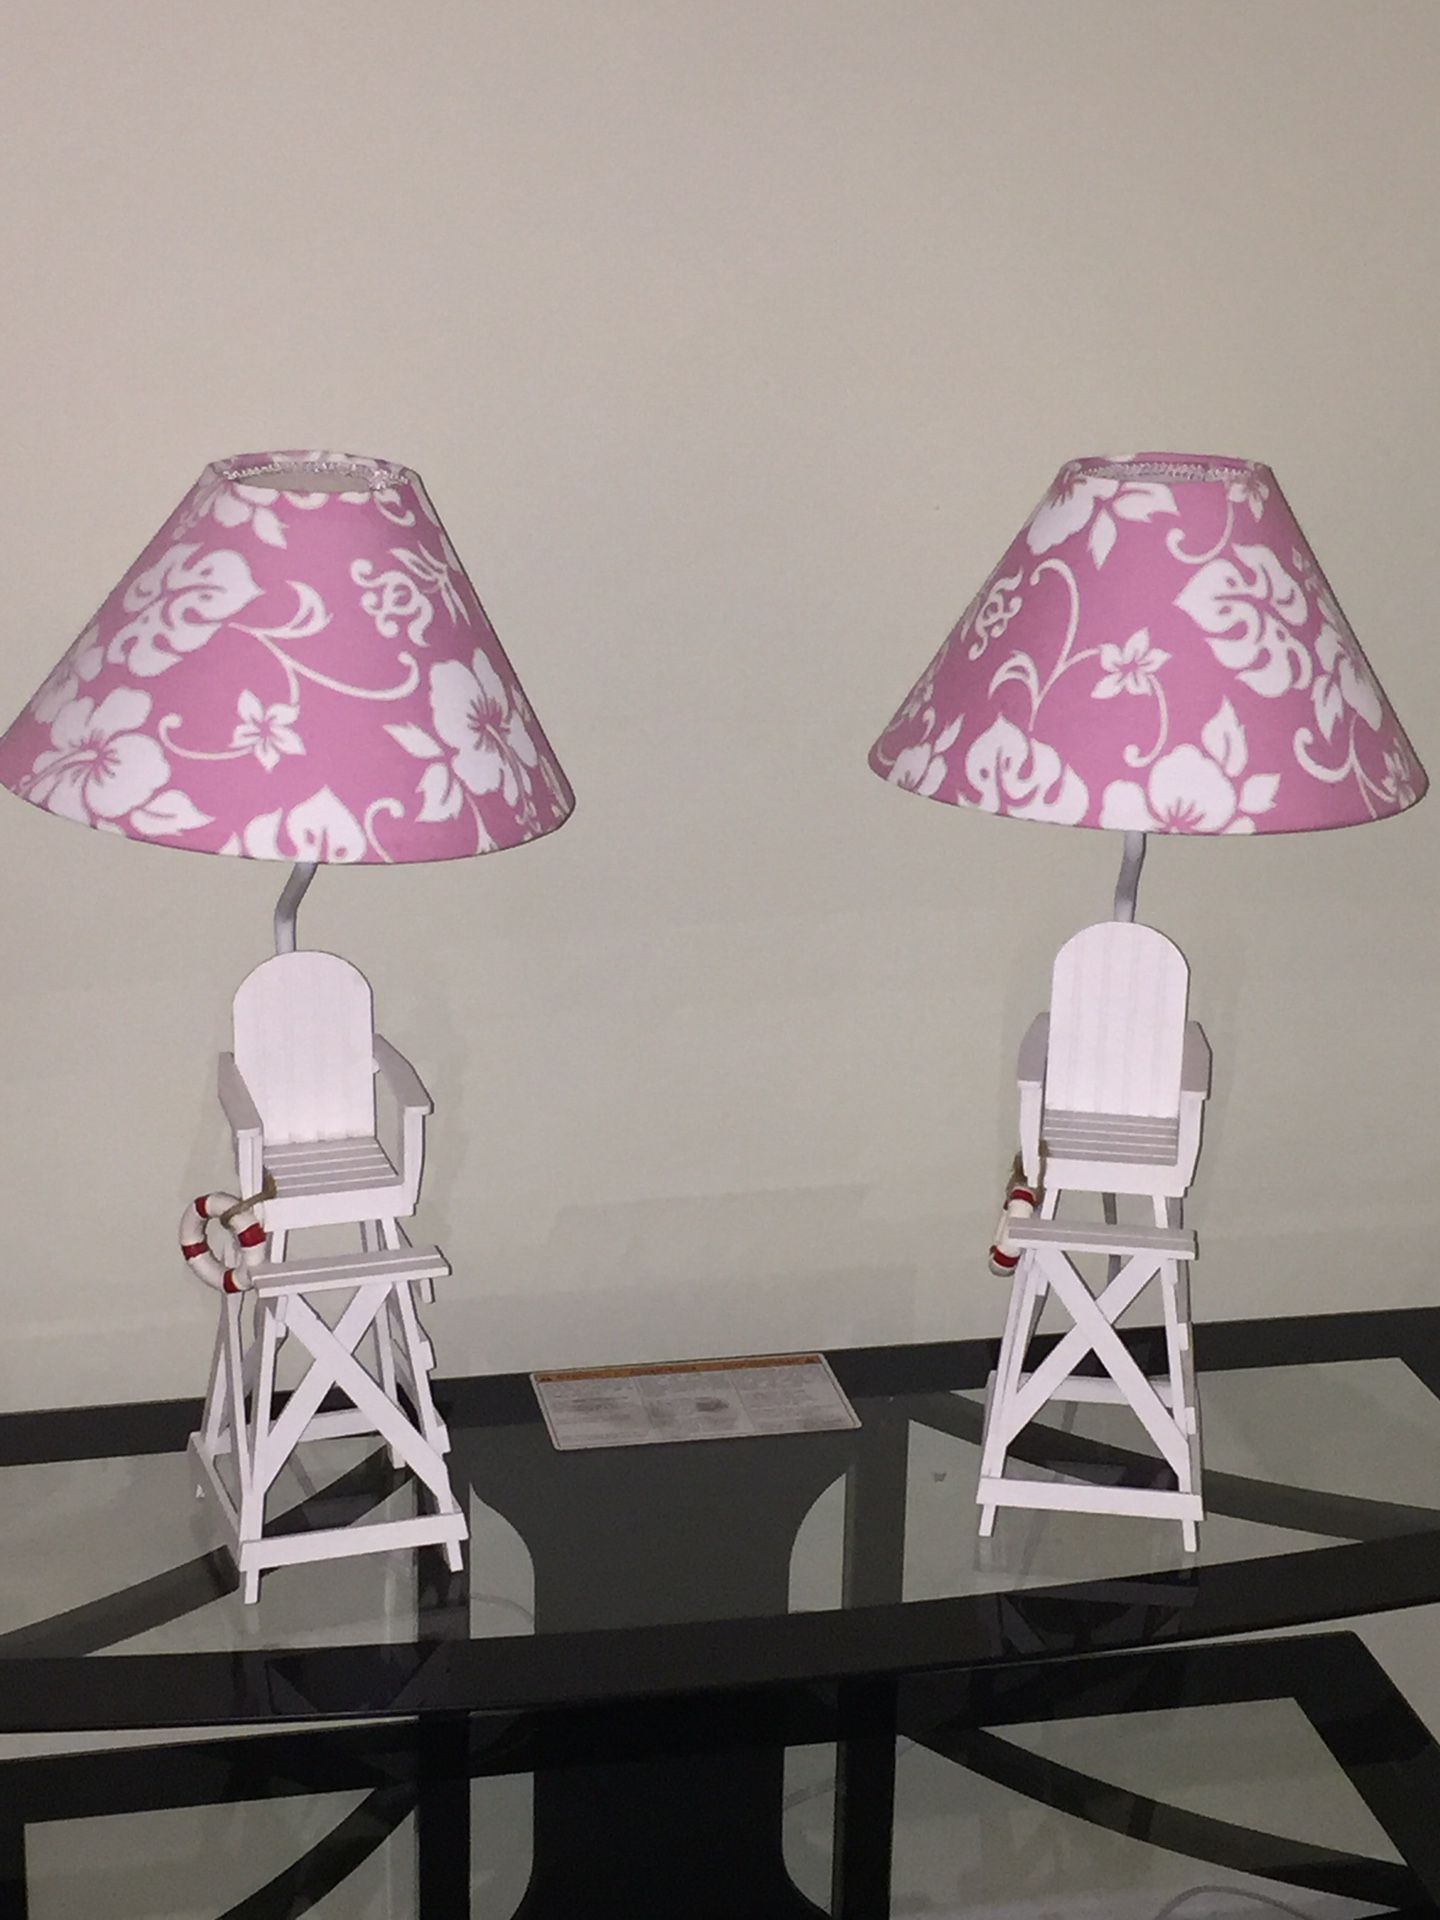 Lifeguard chair lamps /w pink shade